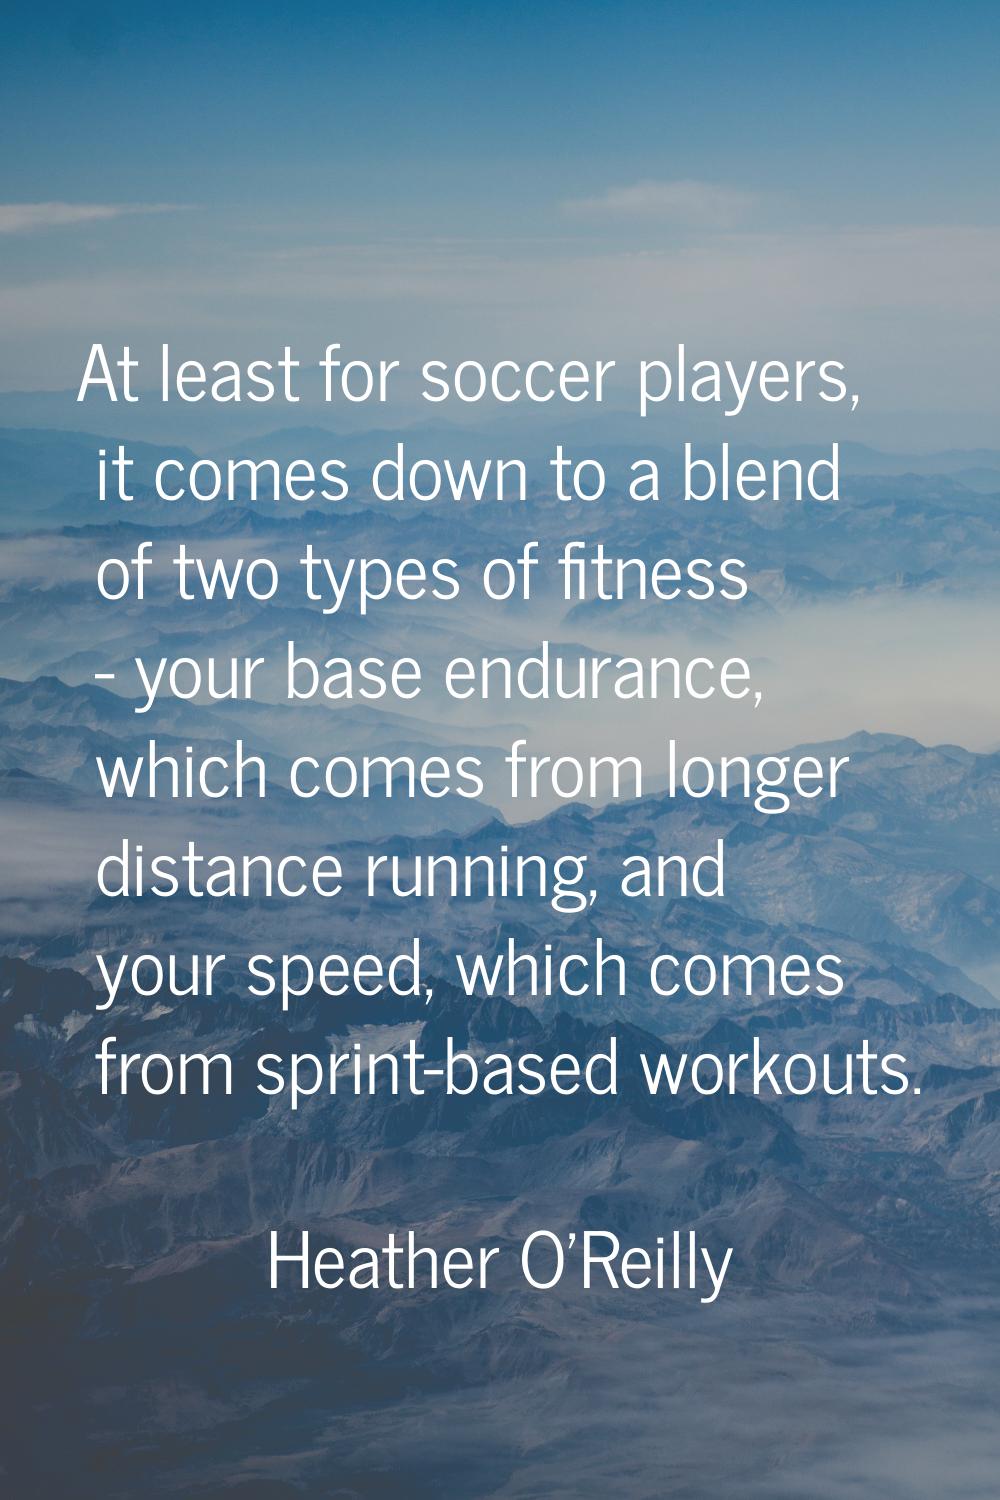 At least for soccer players, it comes down to a blend of two types of fitness - your base endurance